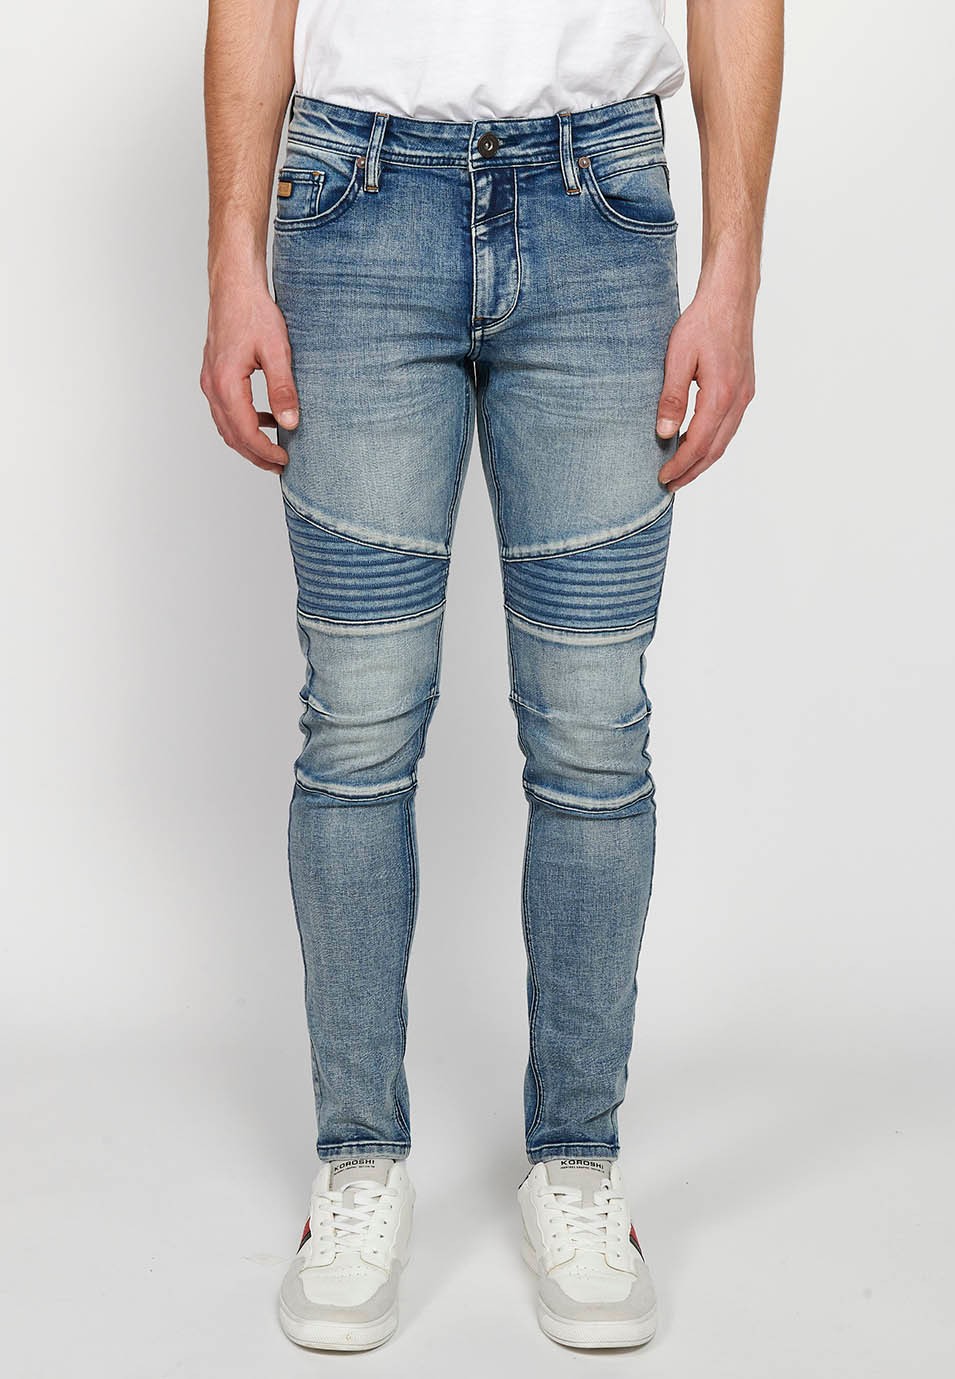 Long skinny fit biker jeans with front zipper and button closure and cut details on the knees in Blue for Men 6